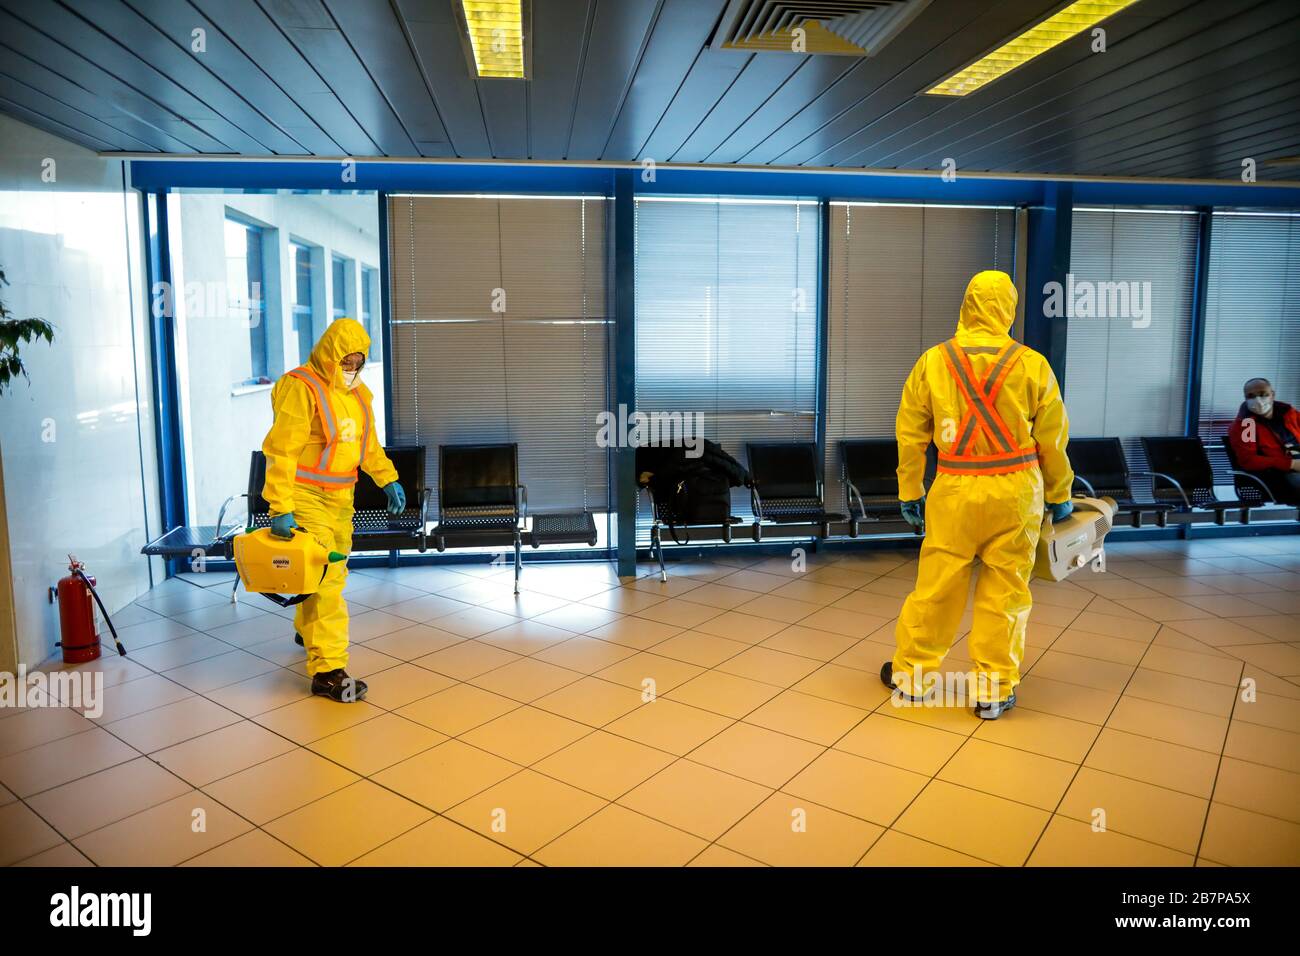 Otopeni, Romania - February 25, 2020: People wearing protective suits spray disinfectant chemicals on the Henri Coanda International Airport to preven Stock Photo